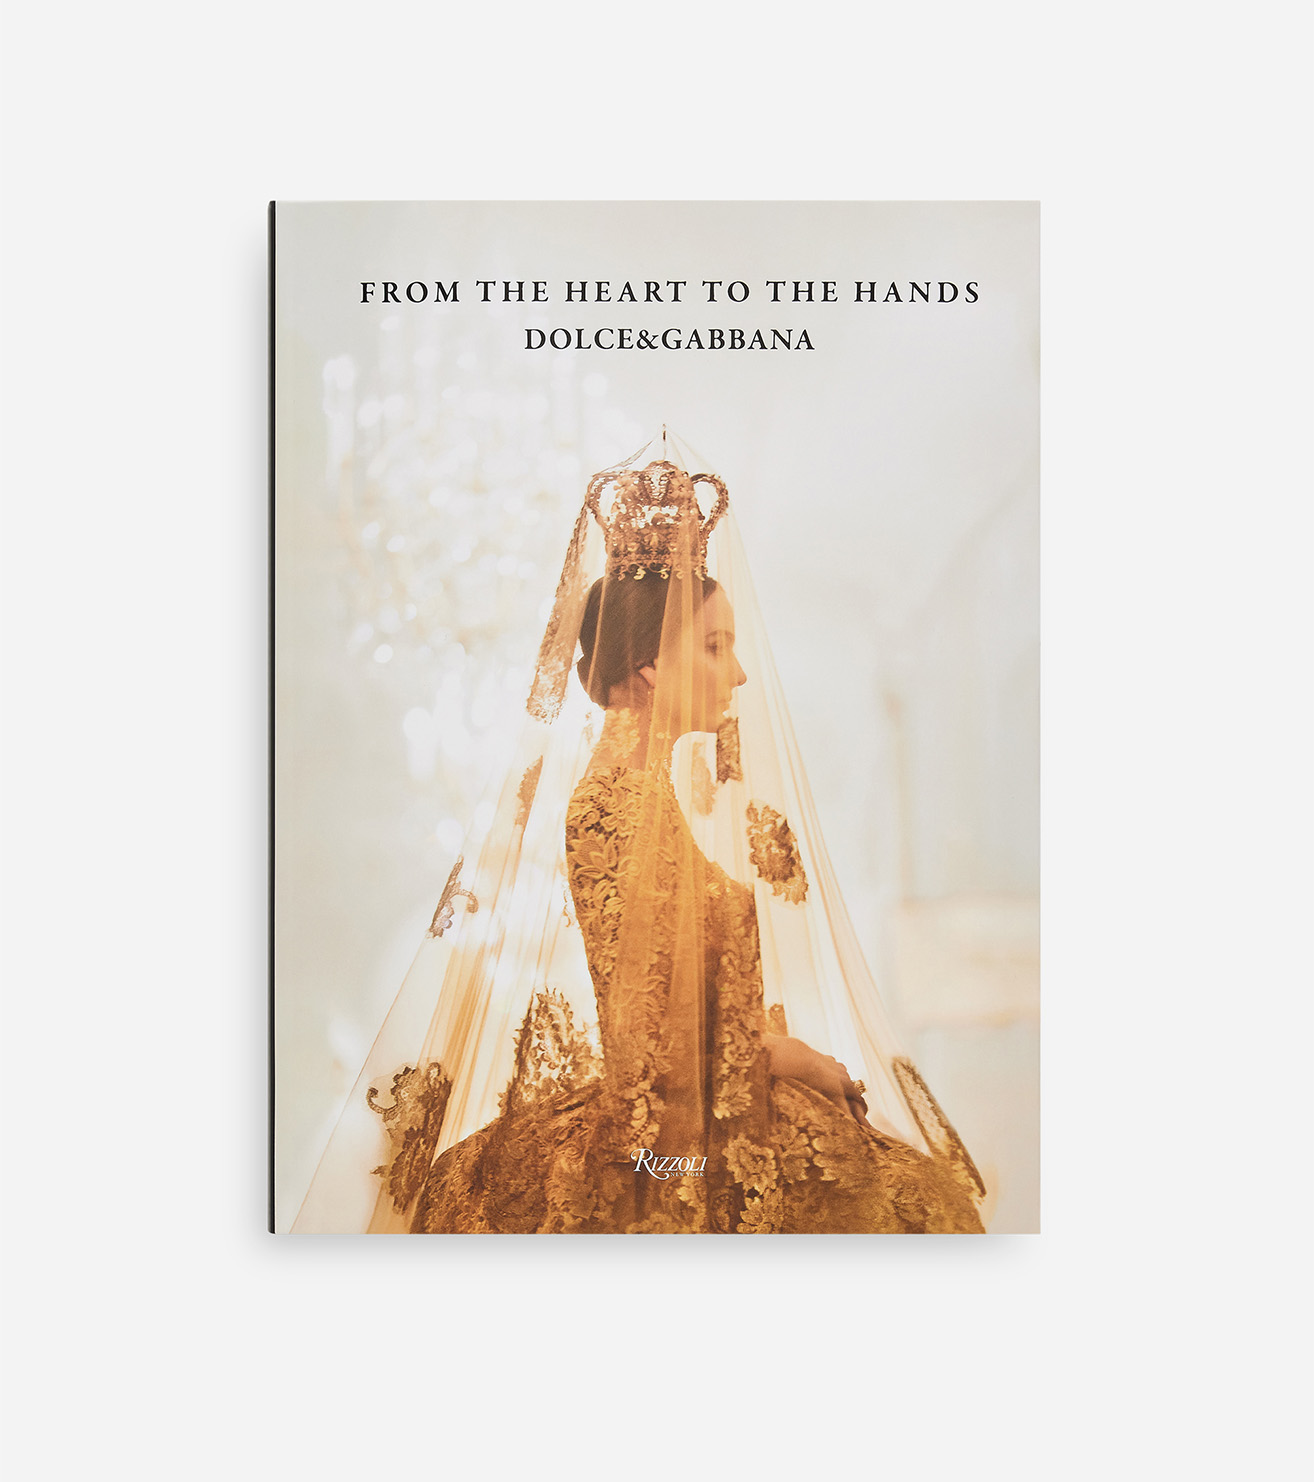 From the Heart to the Hands: Dolce&Gabbana, the book